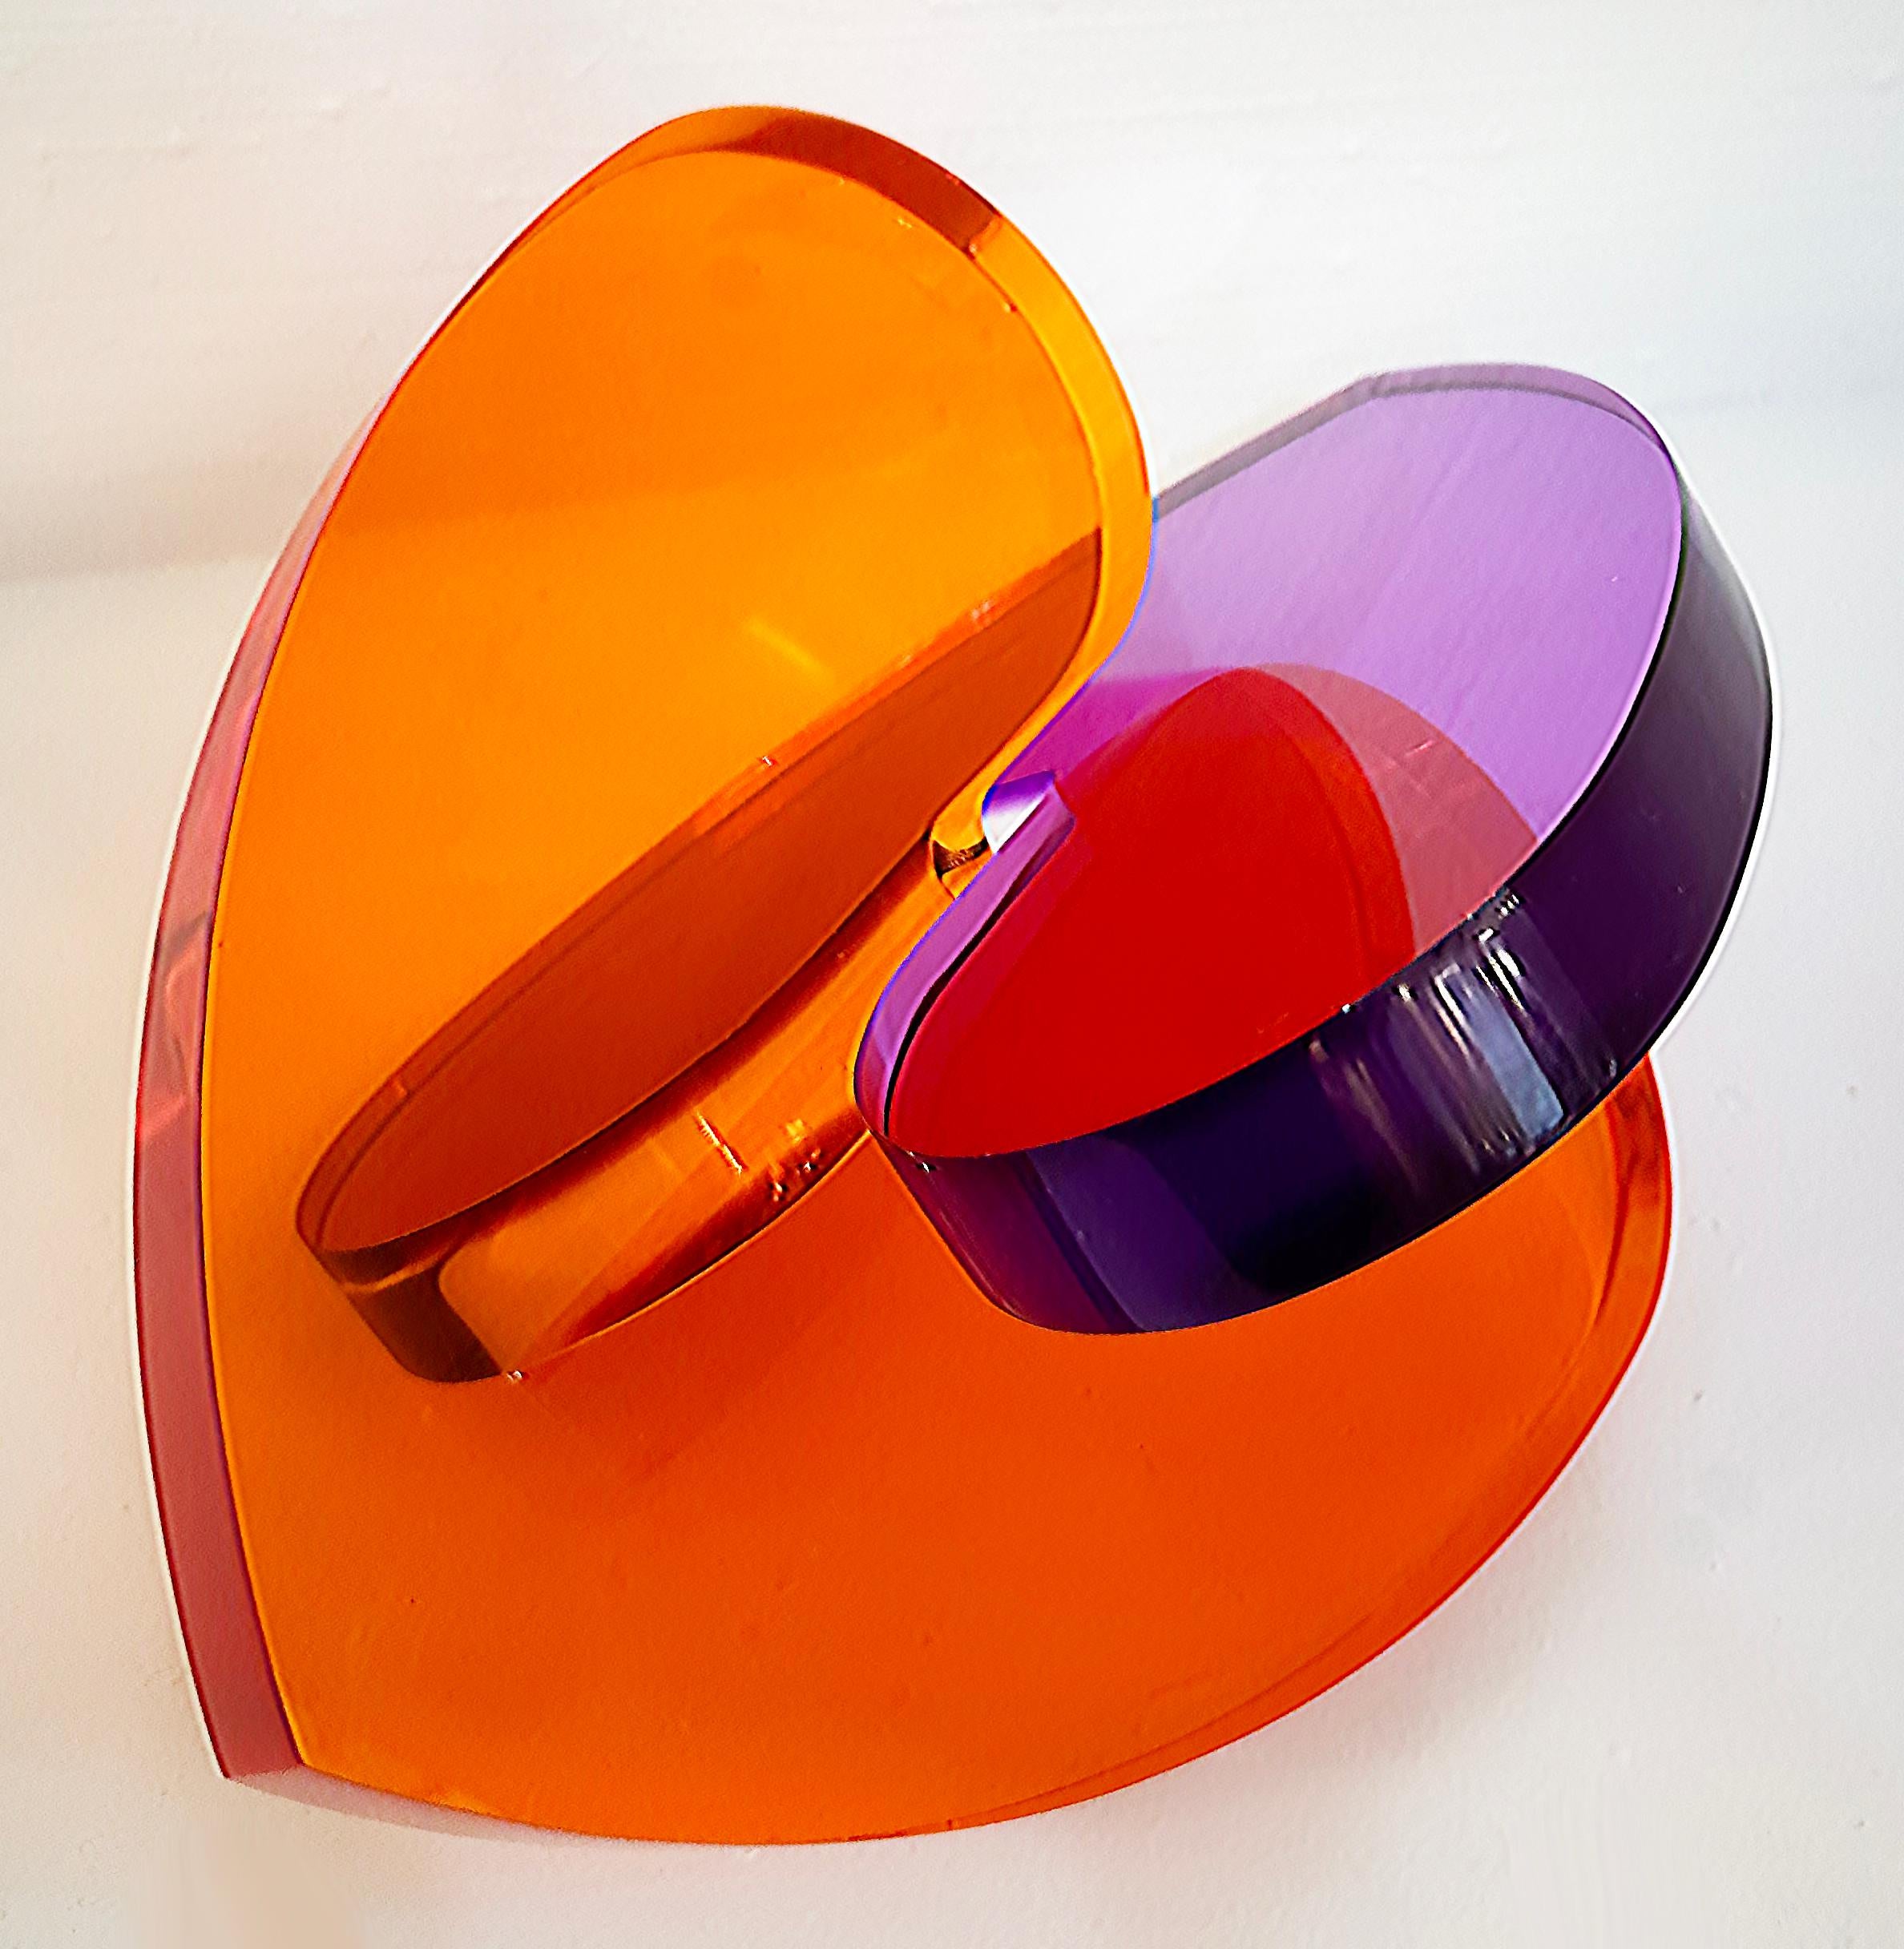 Lucite Interlocking Hearts  Sculpture by Michael Gitter Available in Many Colors 1